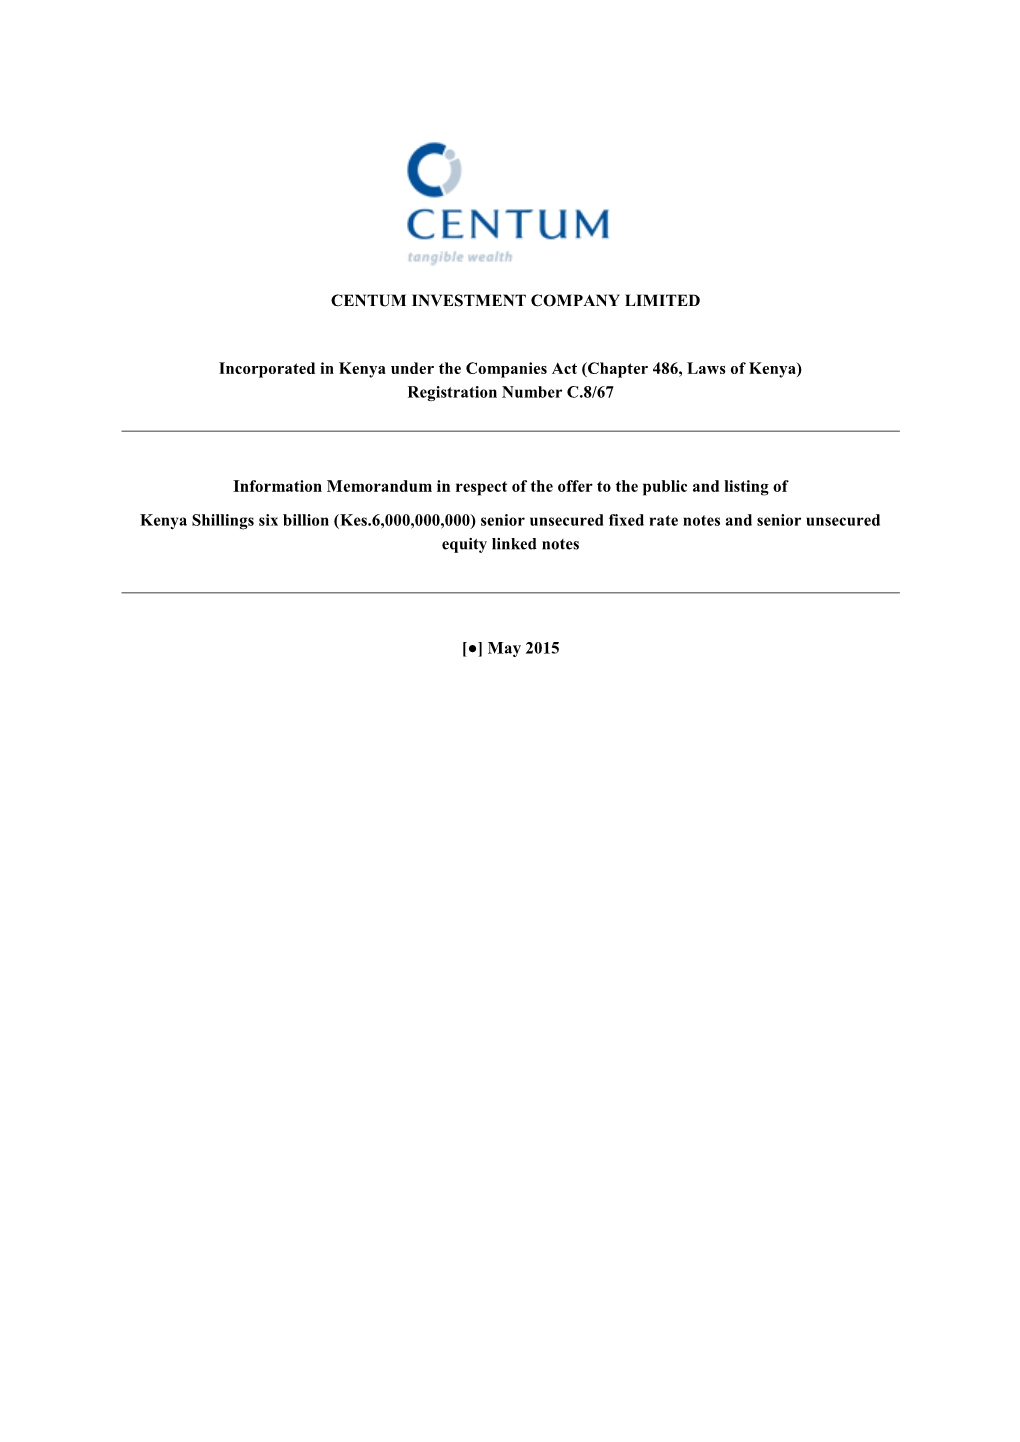 CENTUM INVESTMENT COMPANY LIMITED Incorporated in Kenya Under the Companies